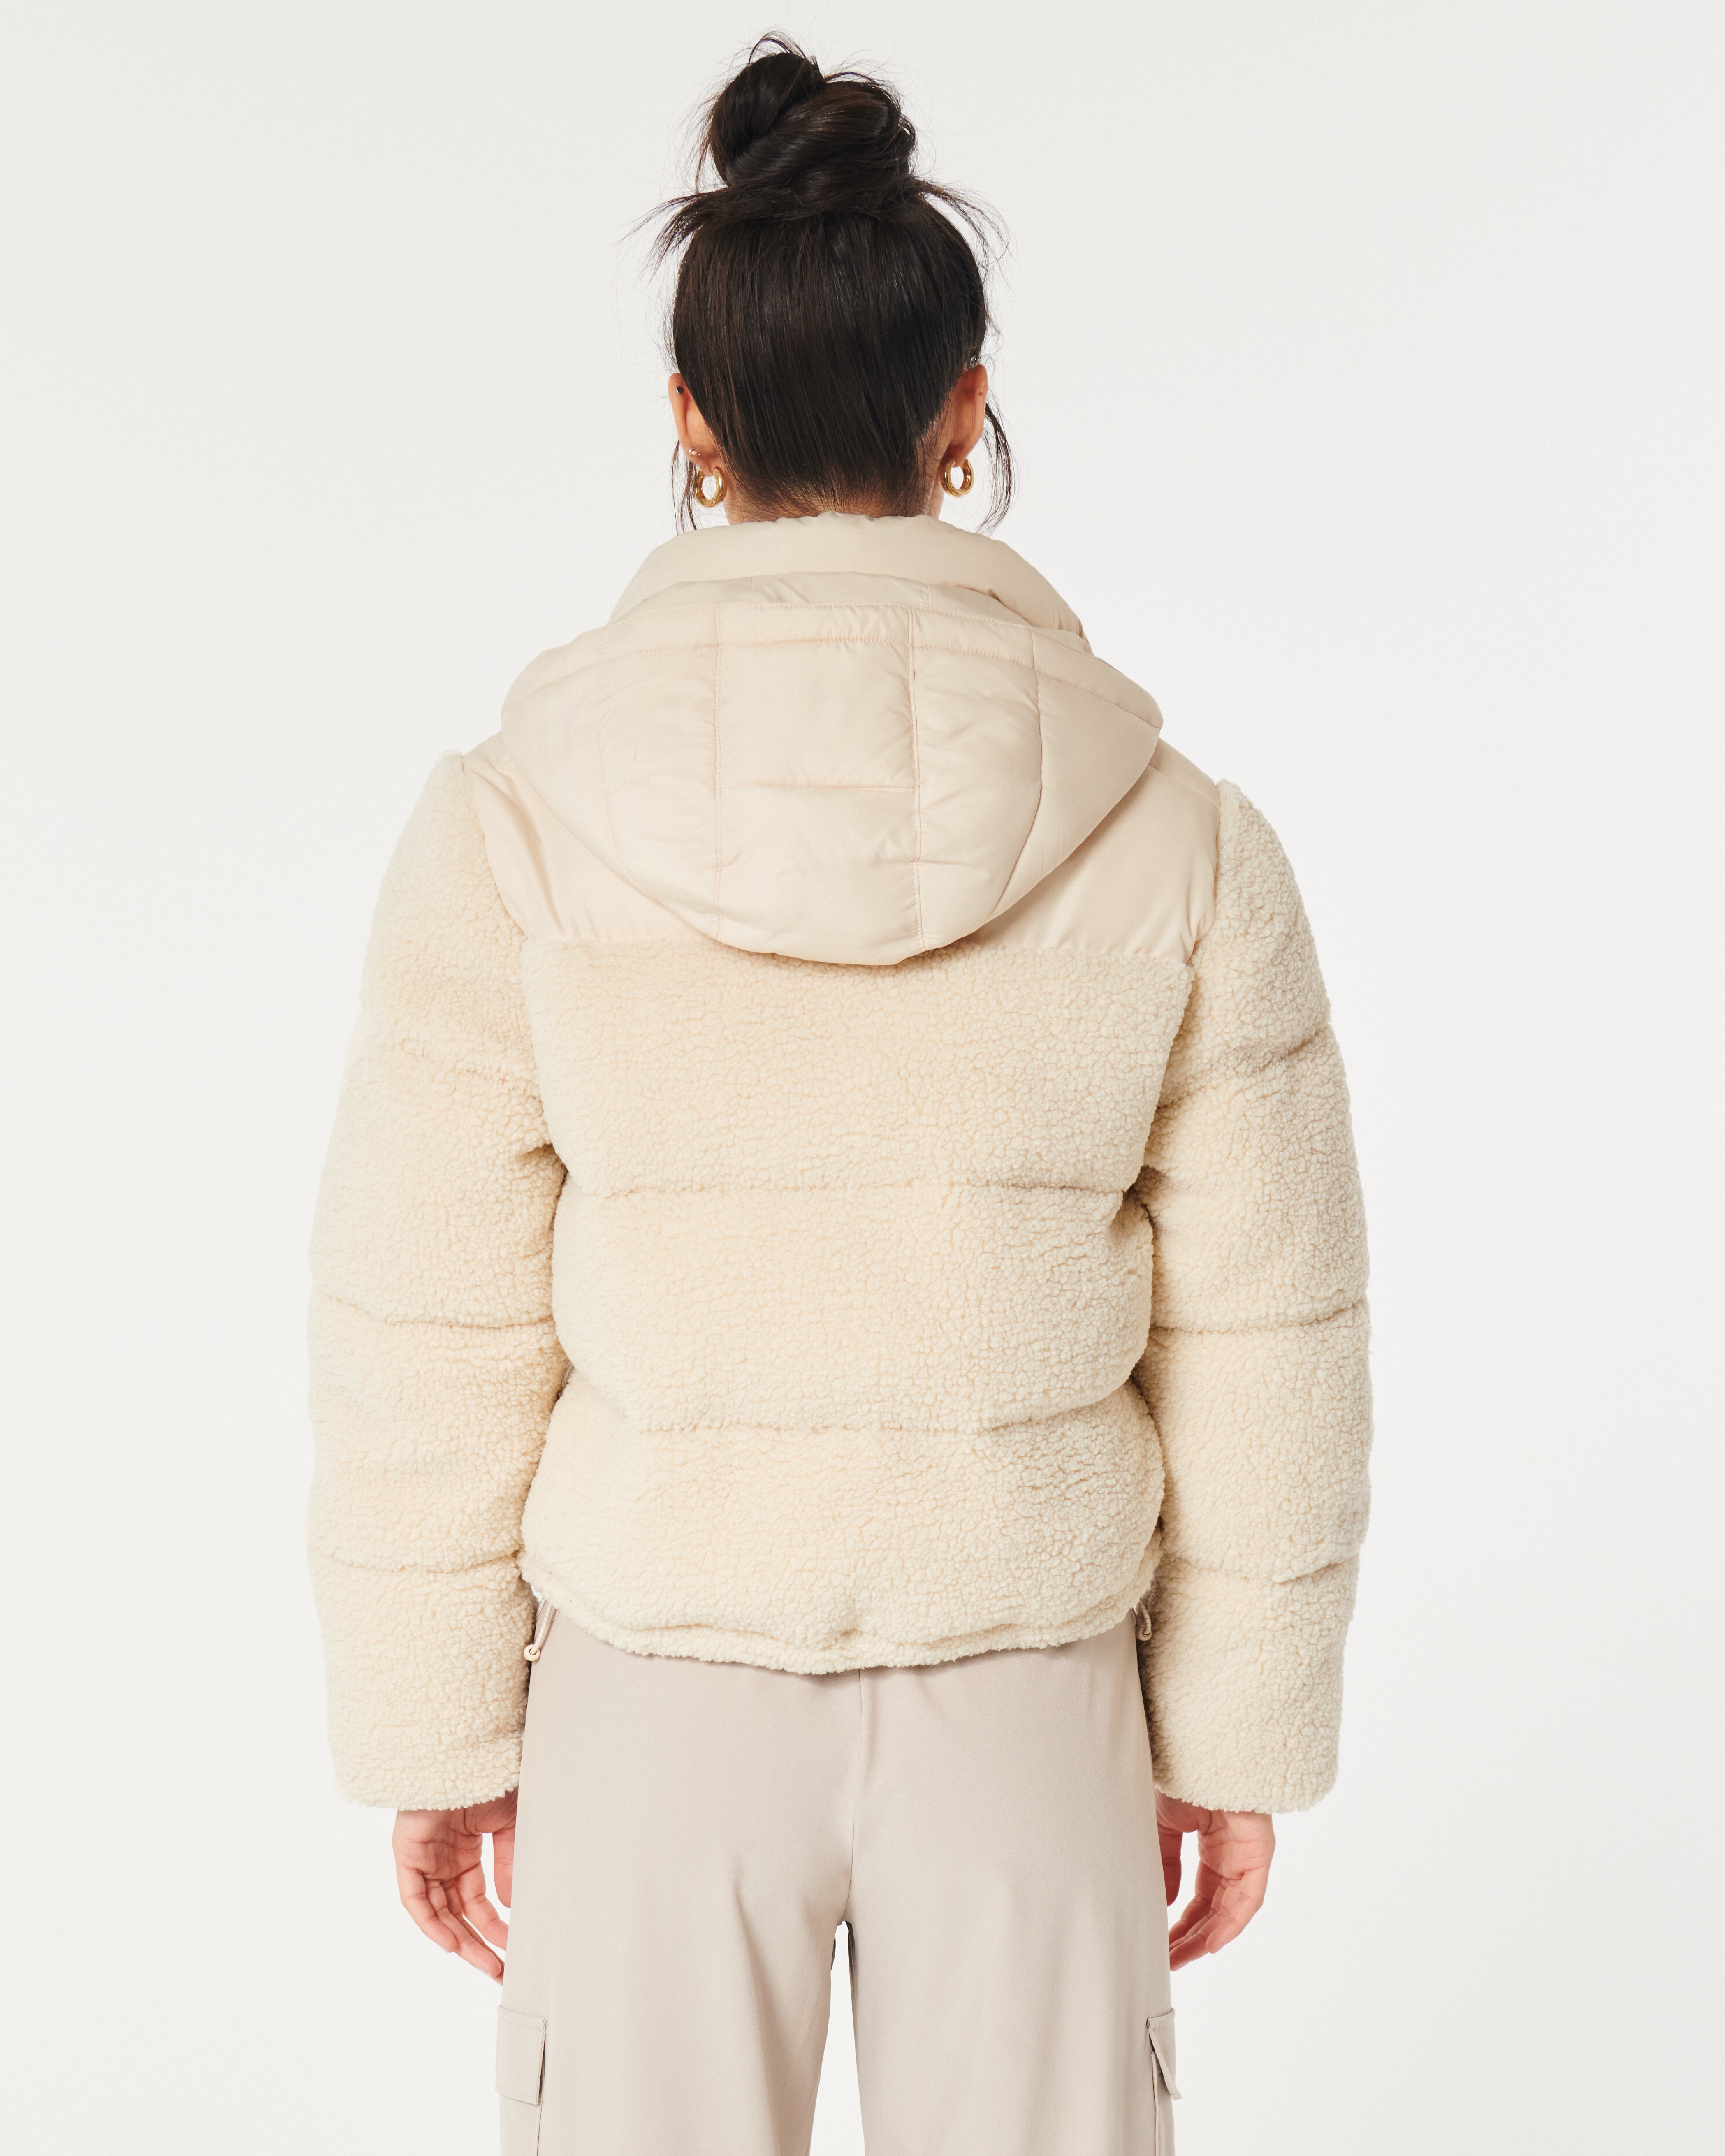 Gilly Hicks Puffer Jacket